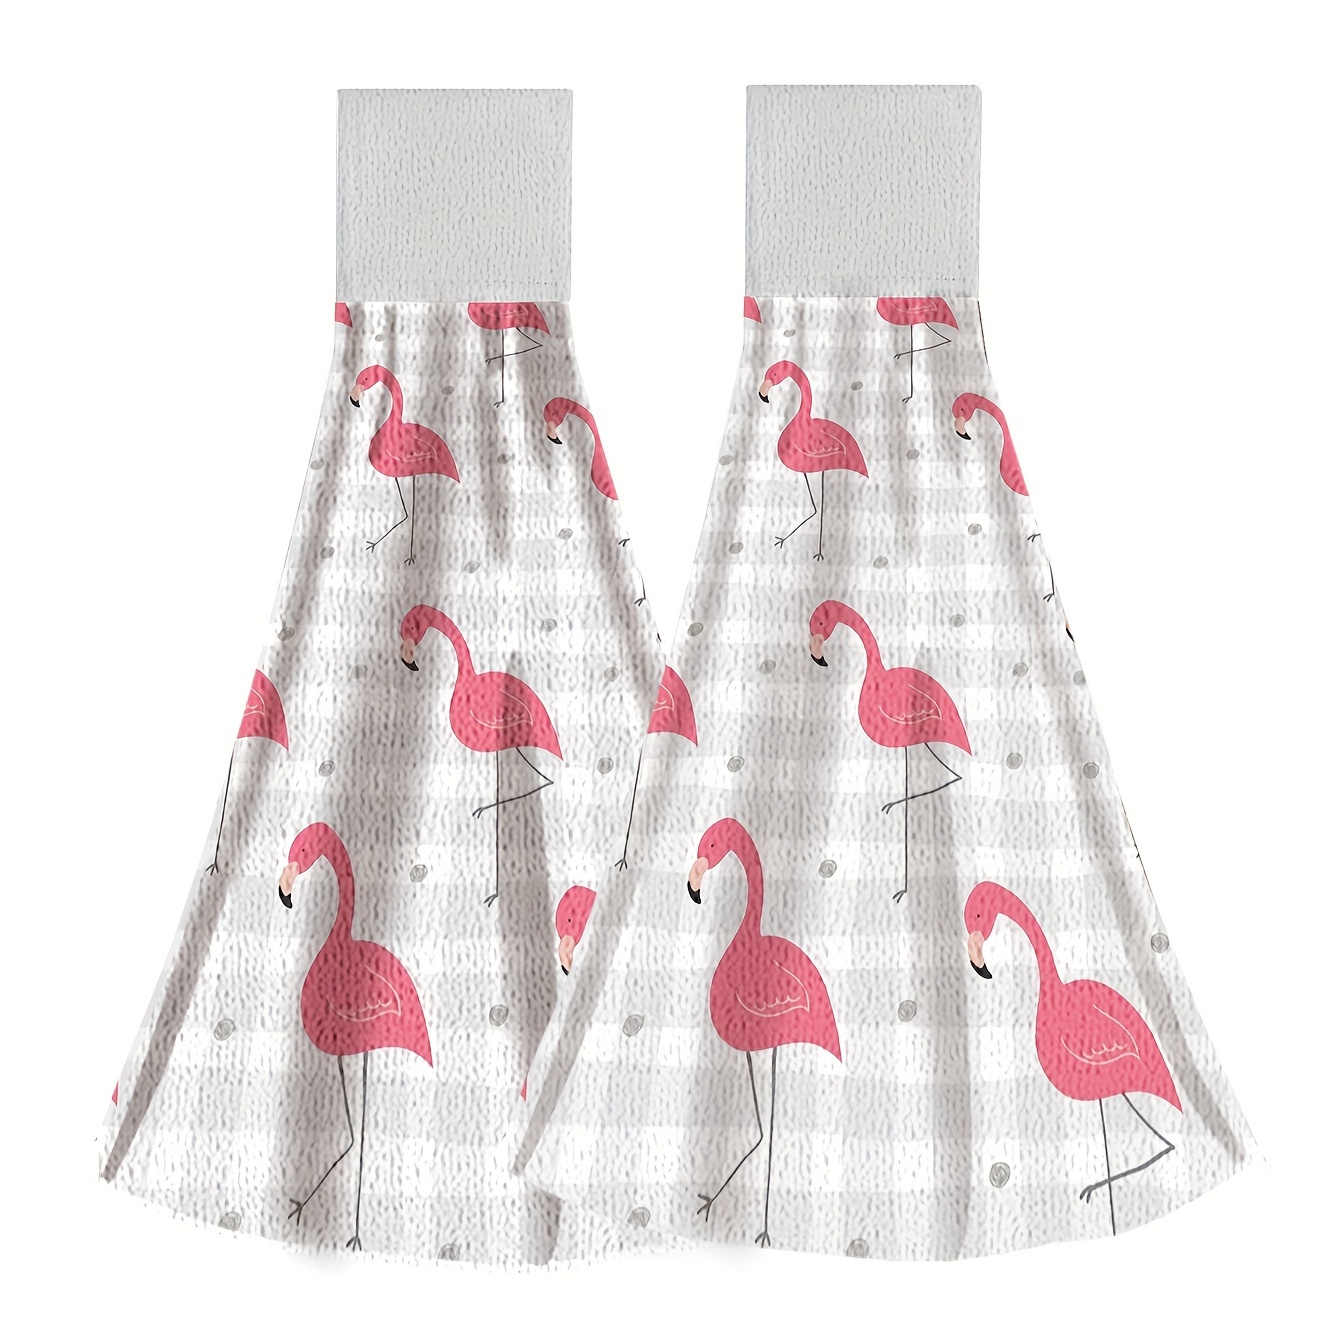 Flamingo Pattern Fingertip Towels, Hanging Towel For Wiping Hands, Highly  Absorbent & Quick Drying Dish Towels, Super Absorbent And Lint Free Towels,  Hanging Tie Towel For Bathroom Kitchen, Bathroom Supplies, Home Decor 